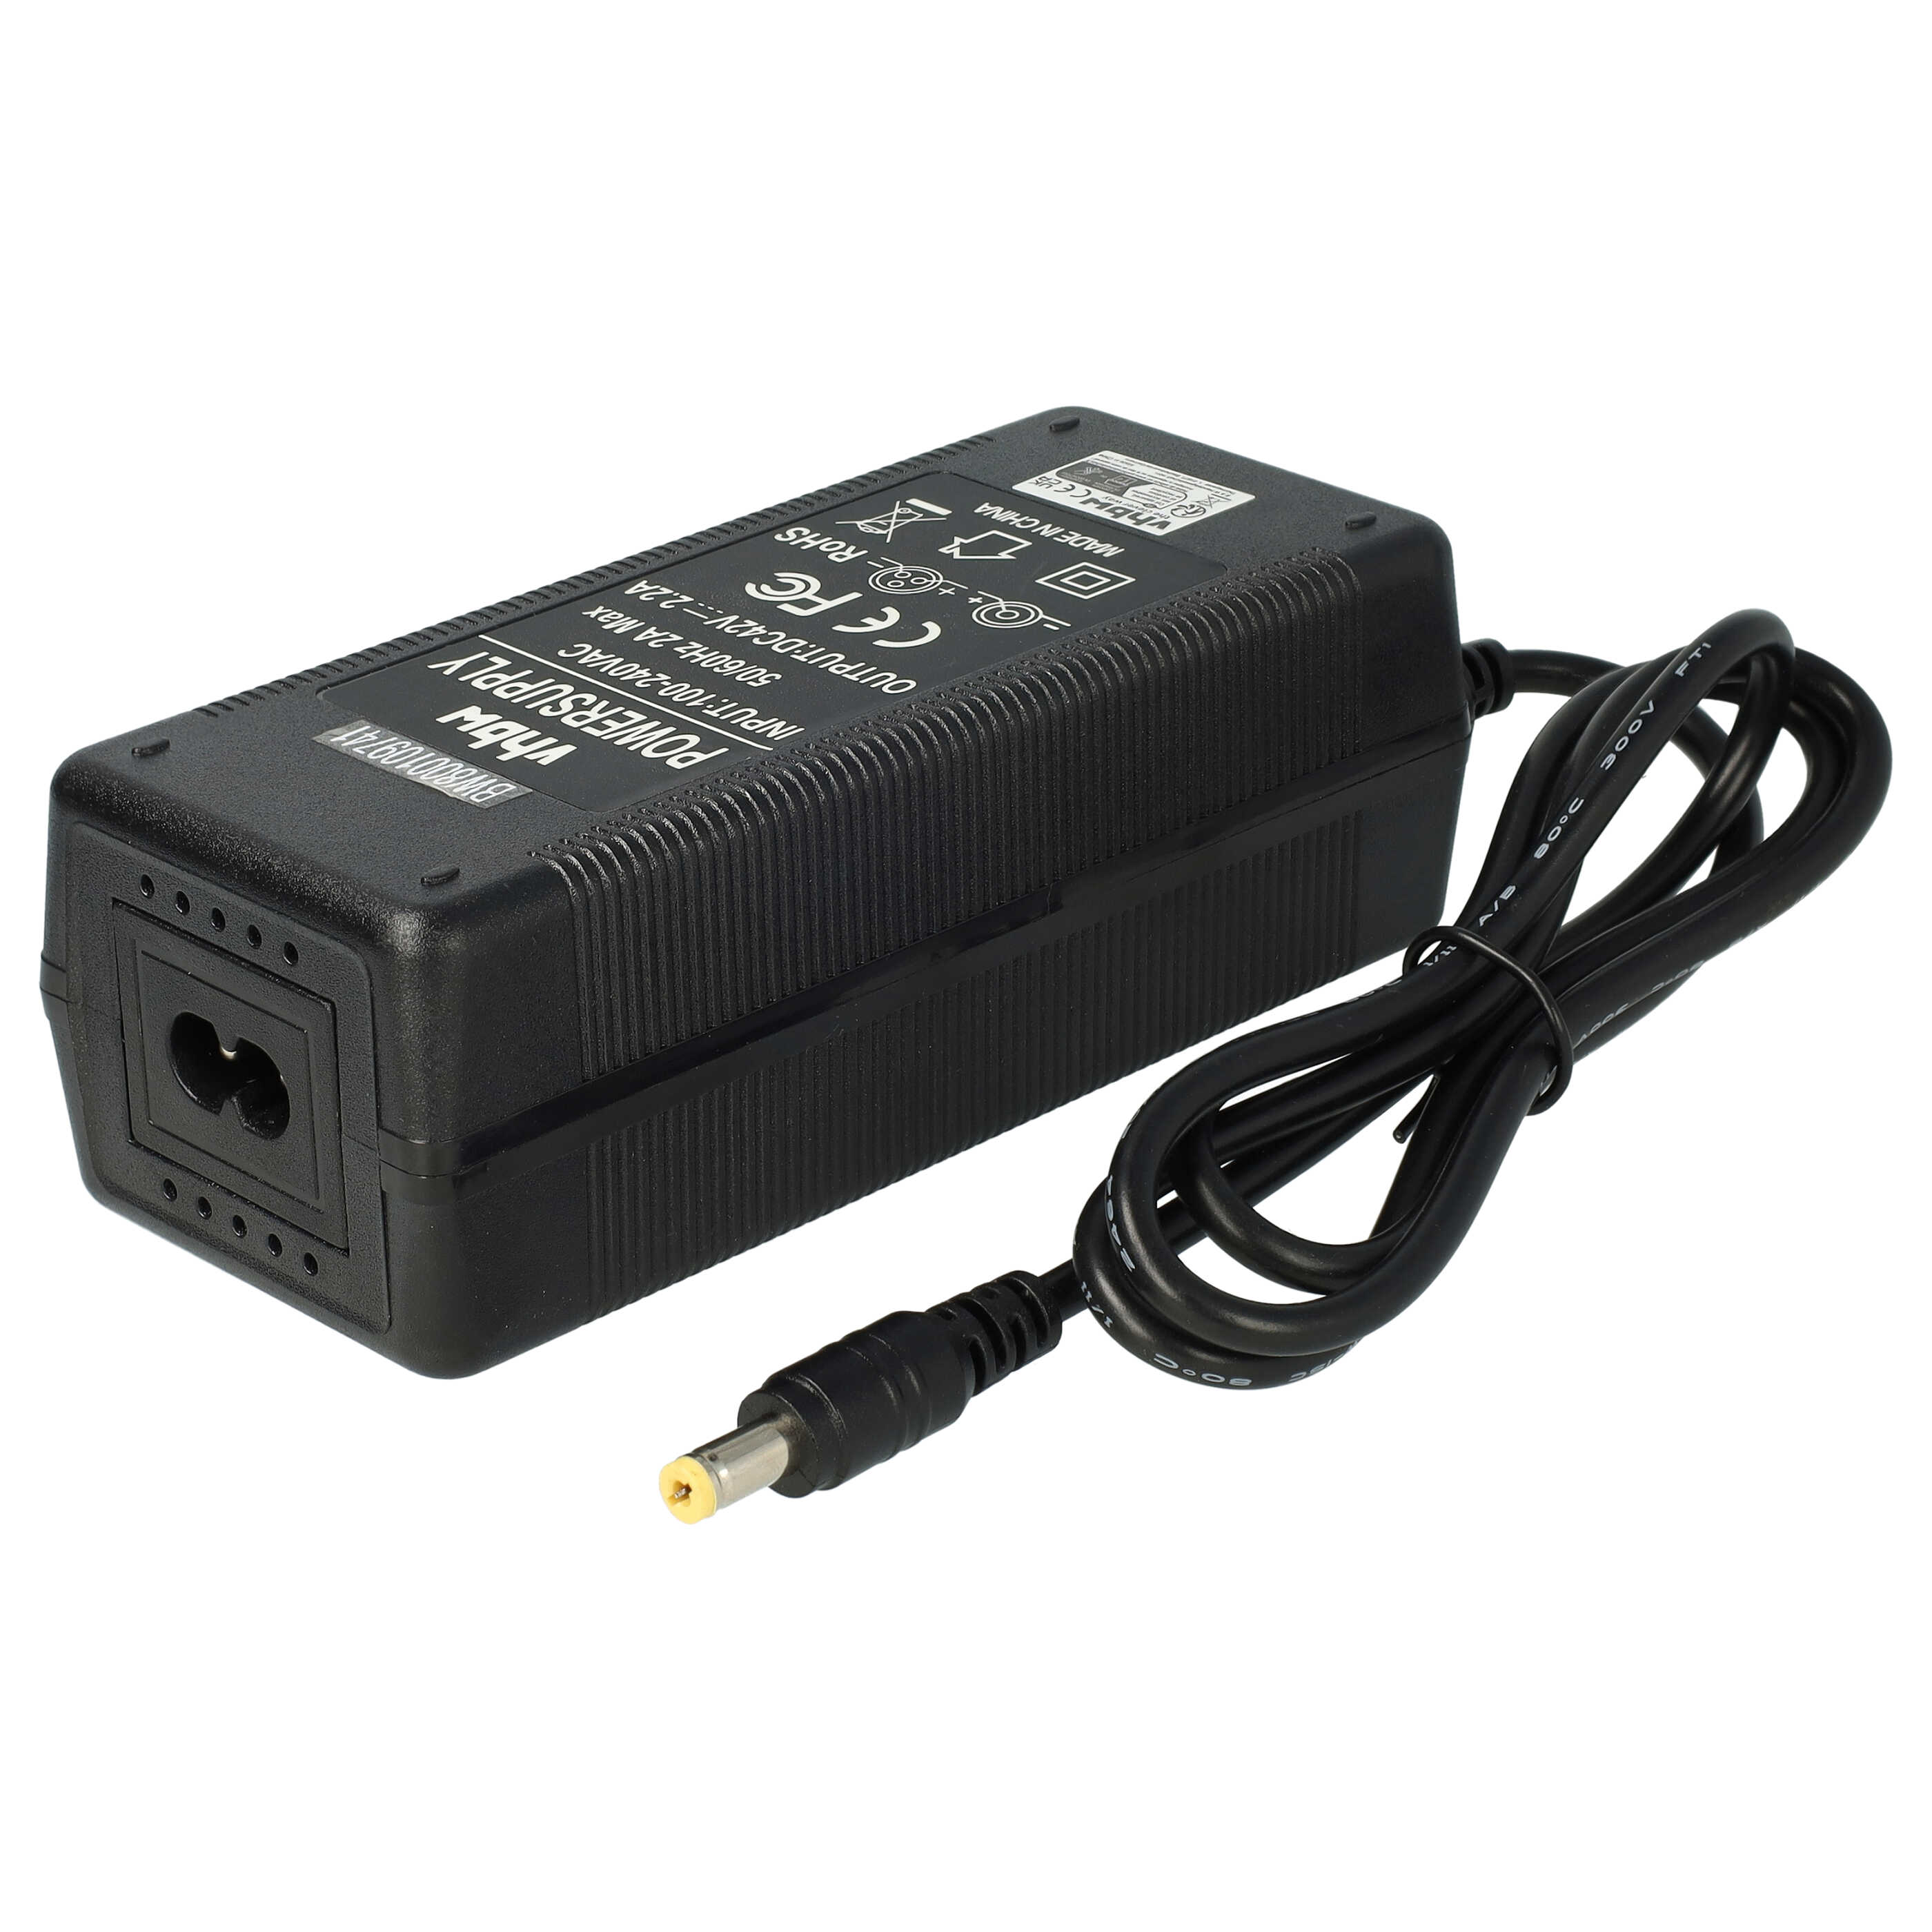 Charger suitable for E-Bike Battery - For 36 V Batteries, With Round Plug, 2.2 A